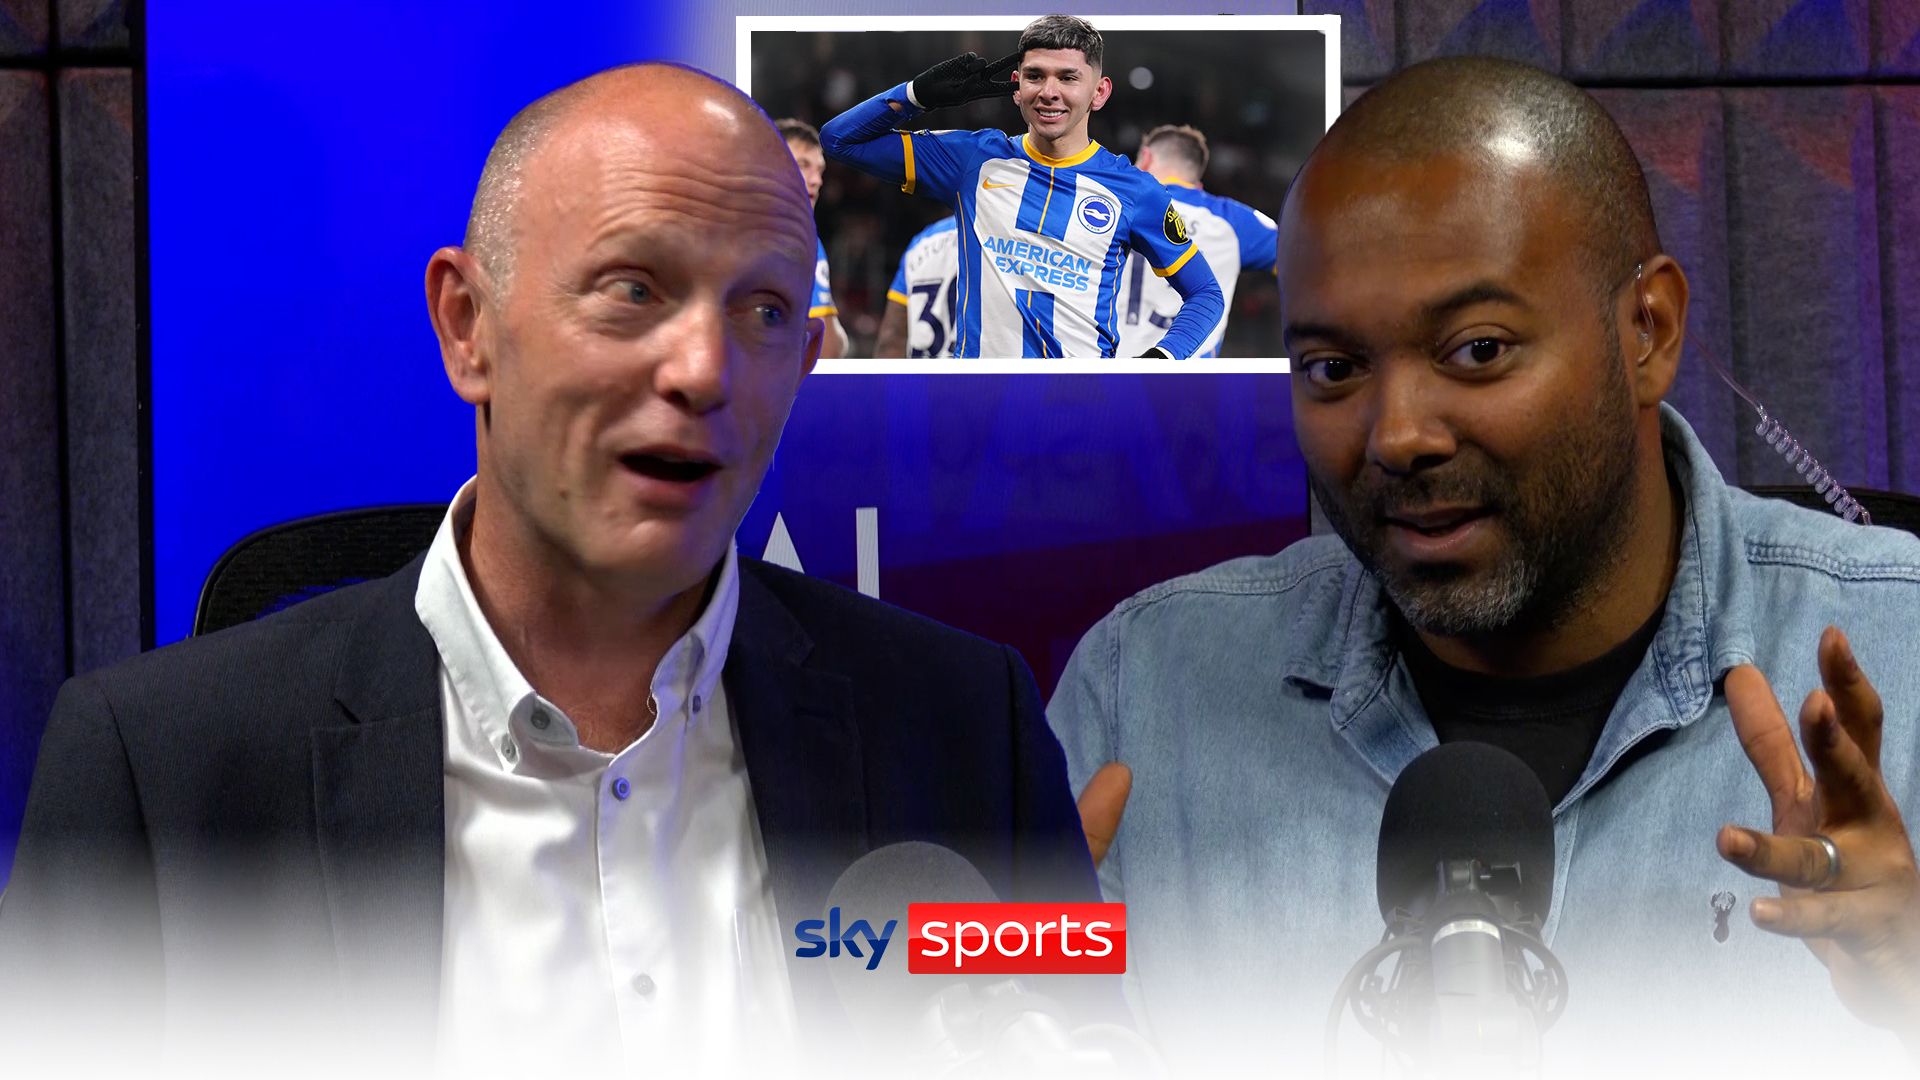 PODCAST: Sky Sports' commentator's special!